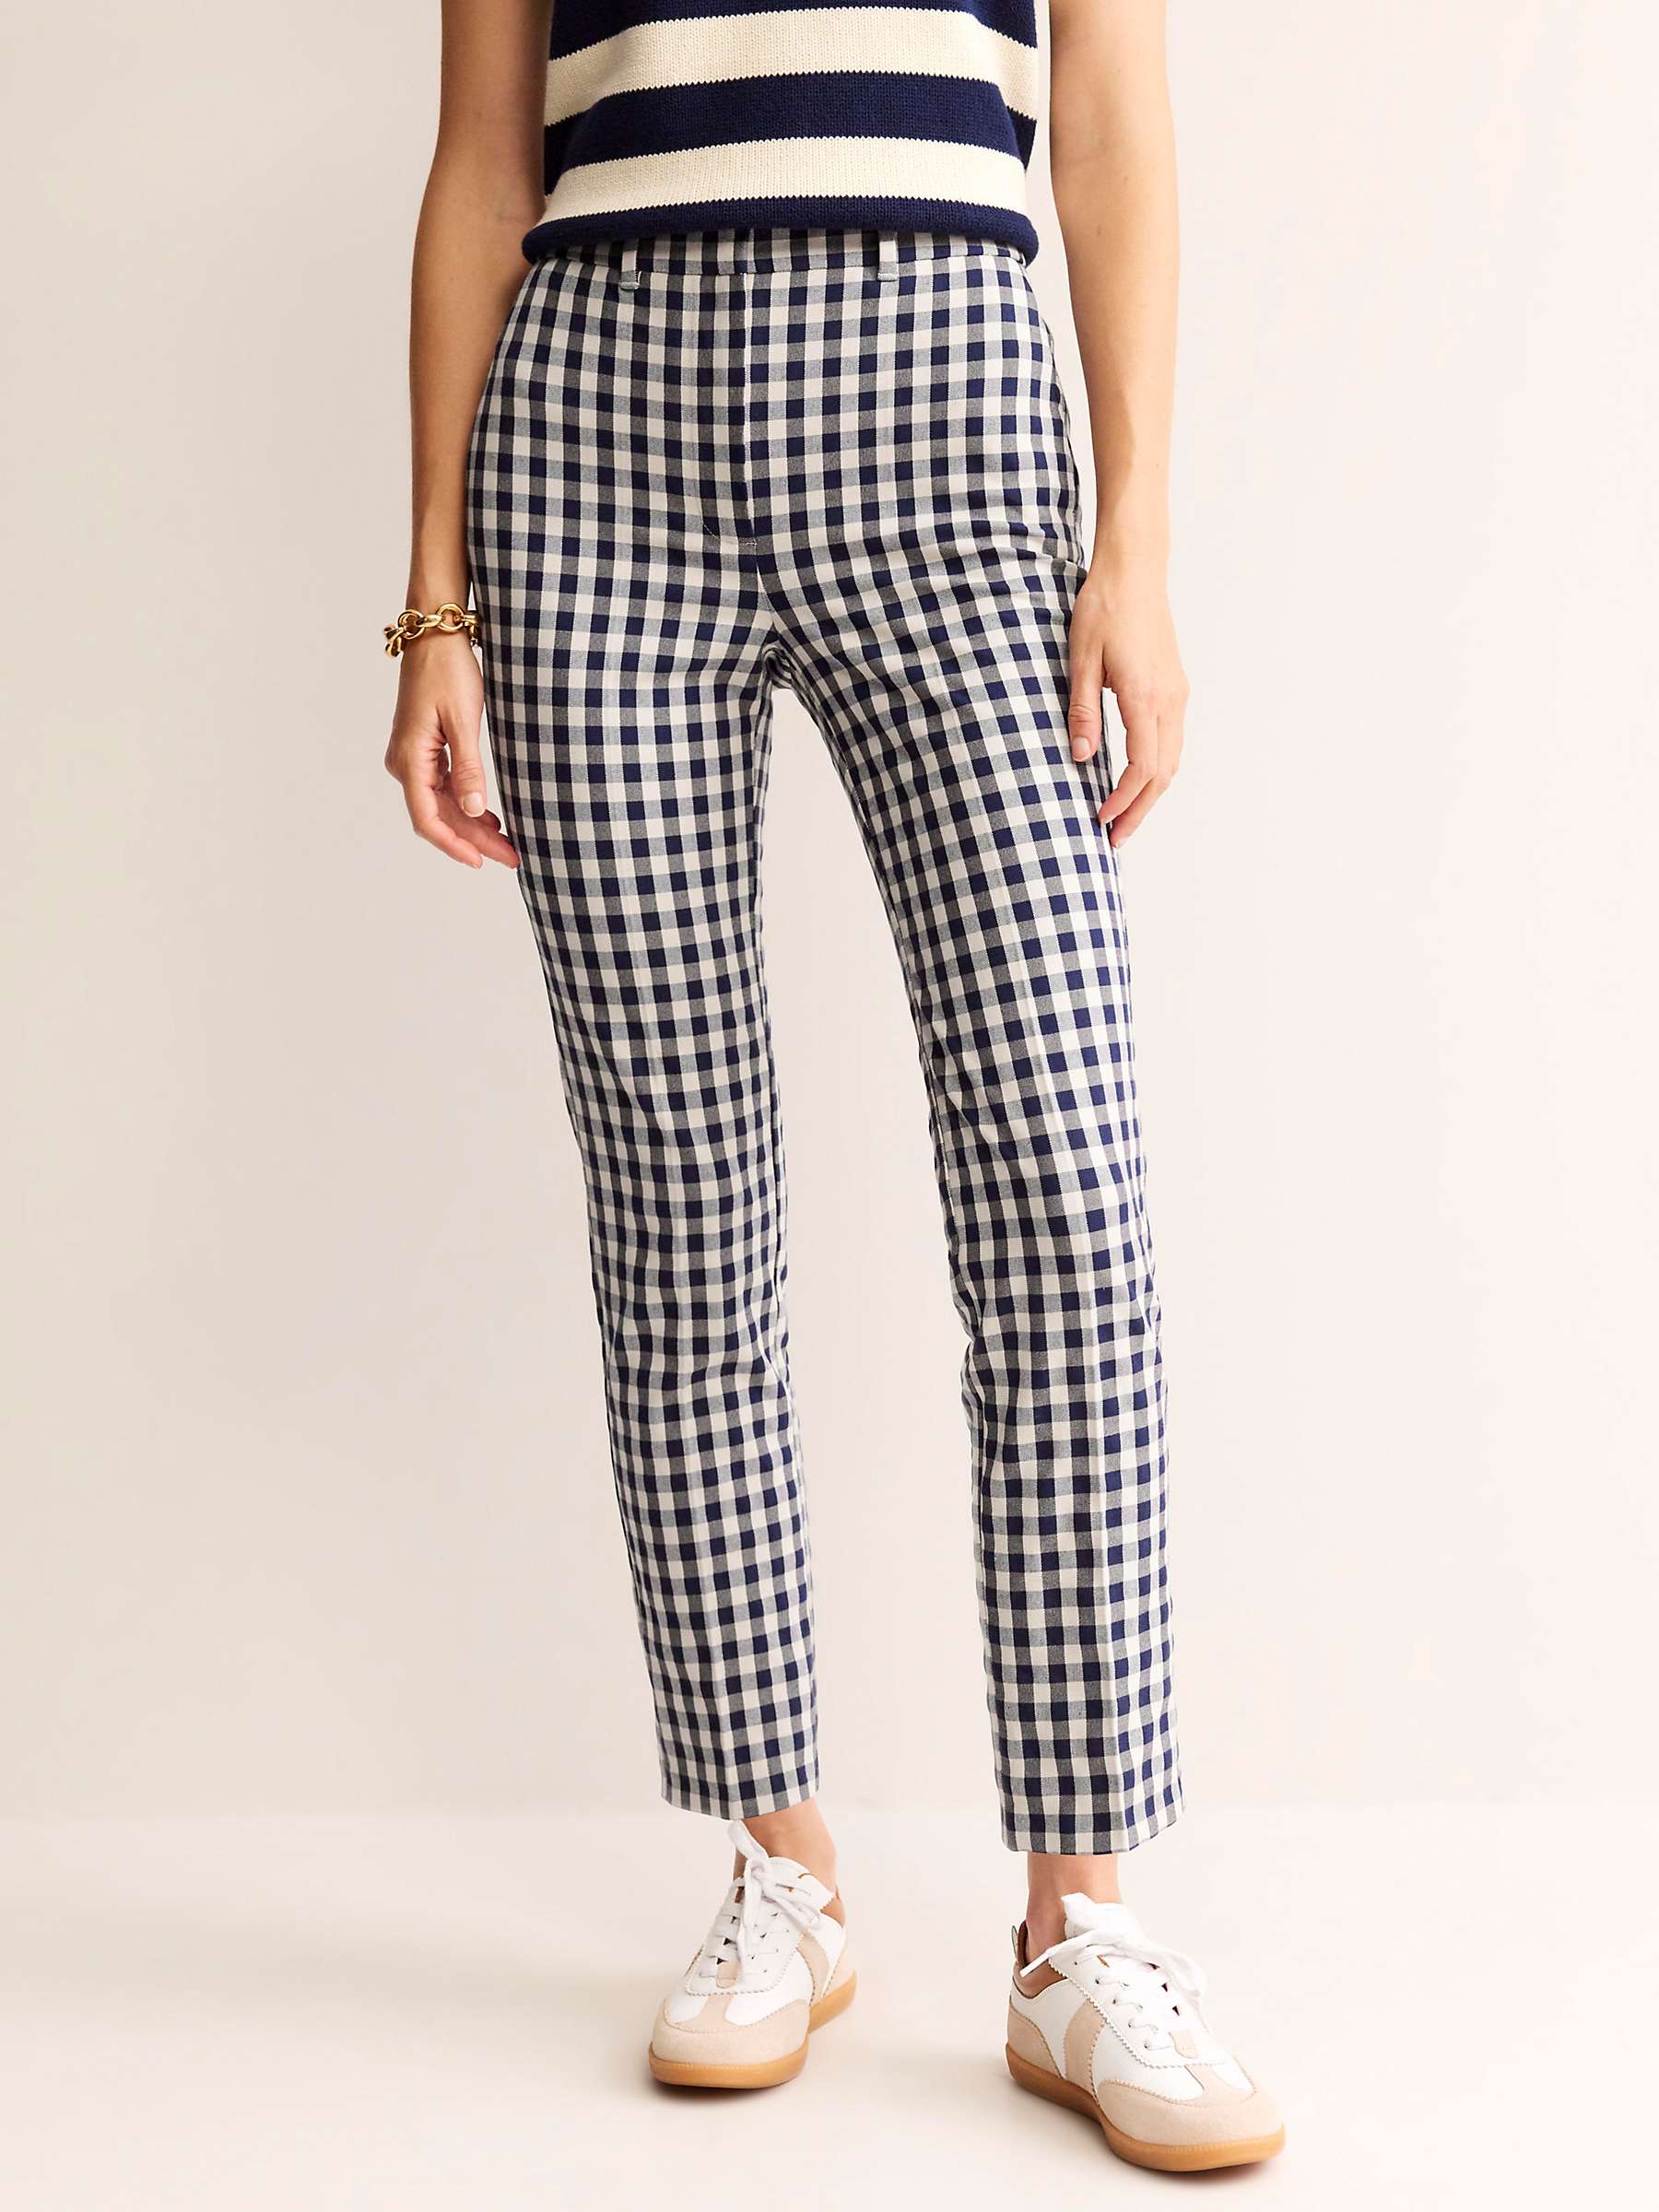 Buy Boden Highgate Slim Fit Trousers, Navy/Stone Gingham Online at johnlewis.com